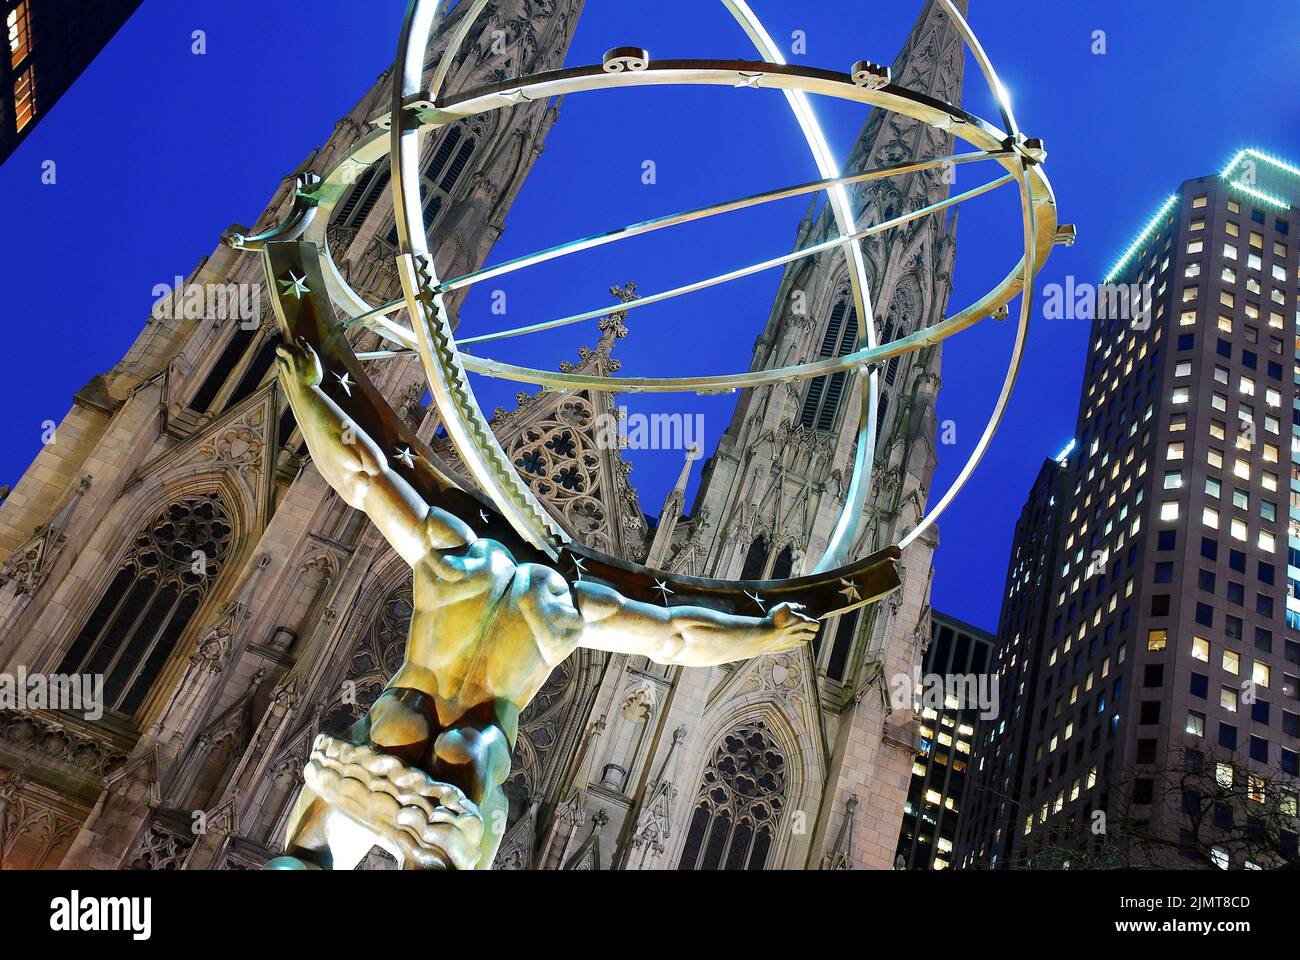 A sculpture of the Greek god Atlas holding the world stands in Rockefeller Center across the street from St Patrick's Cathedral in New York City Stock Photo